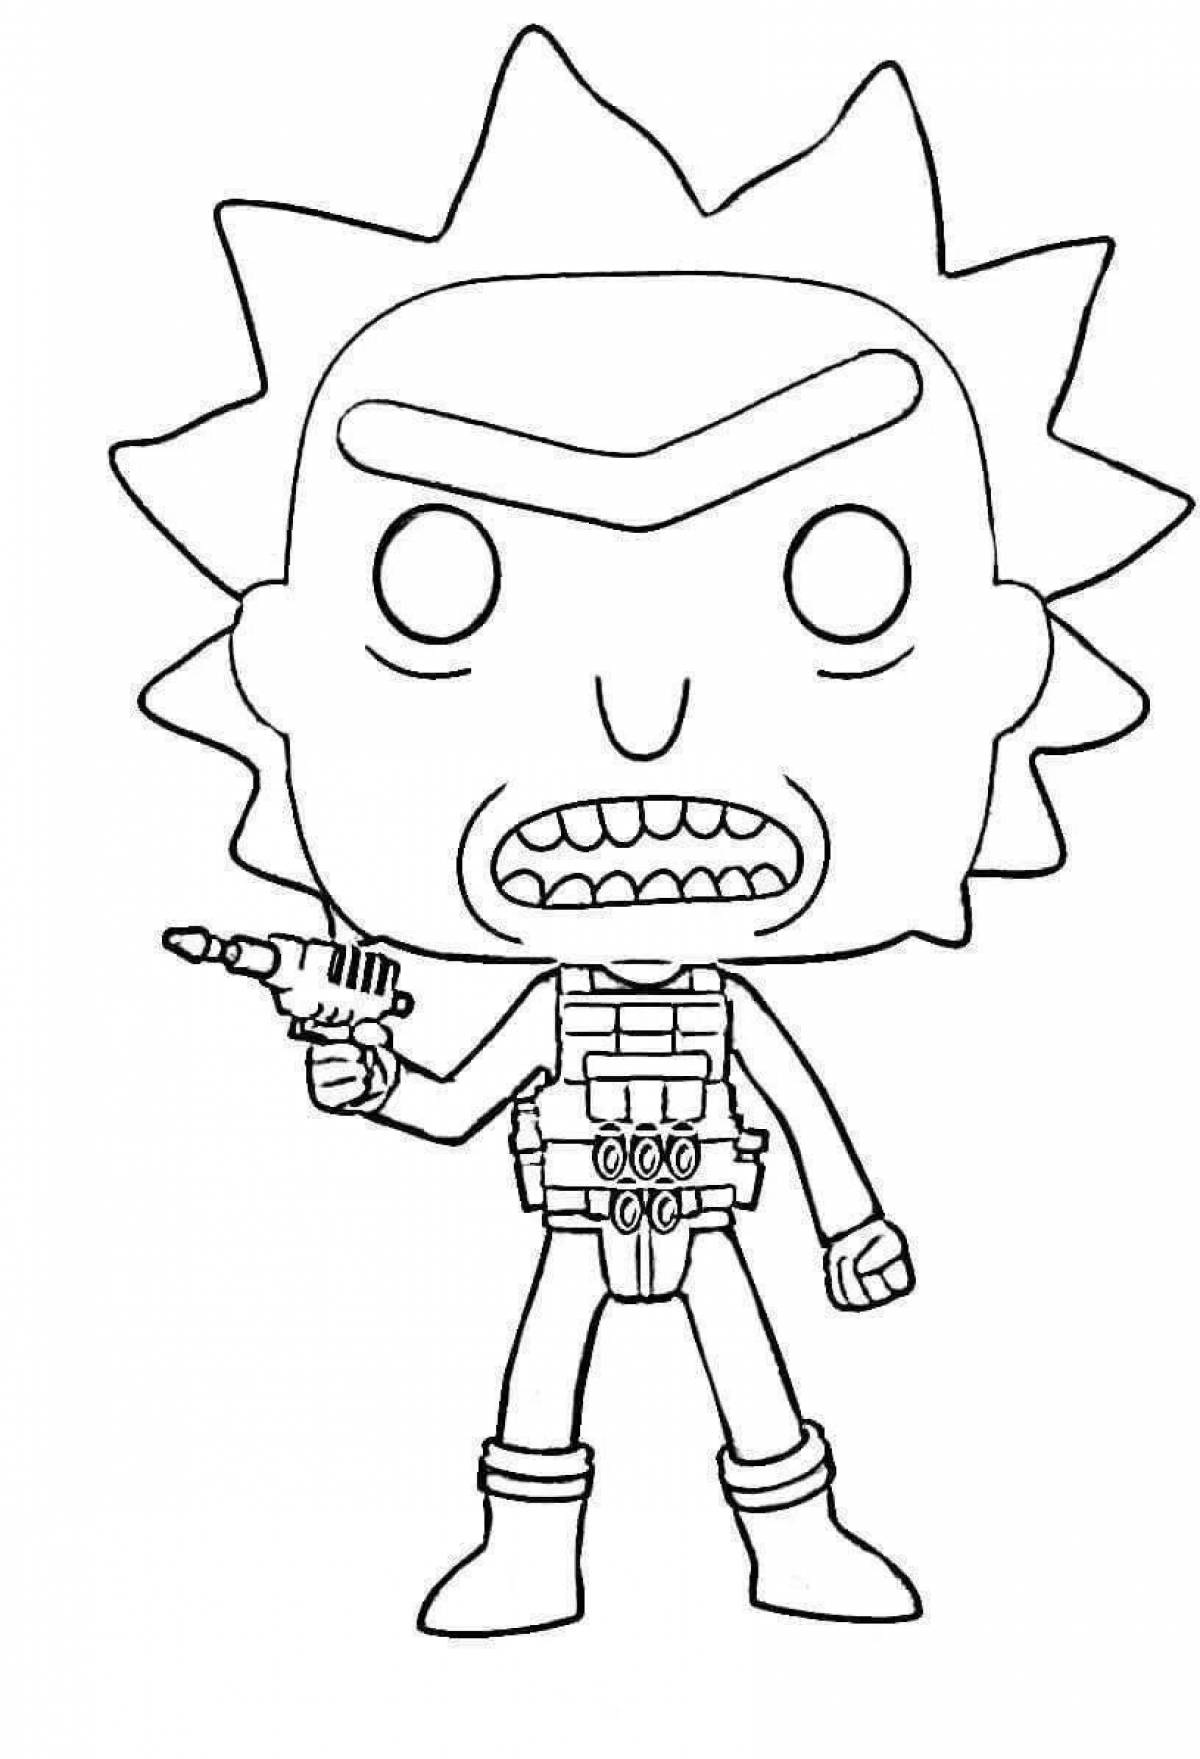 Funky funko pop fortnite coloring page